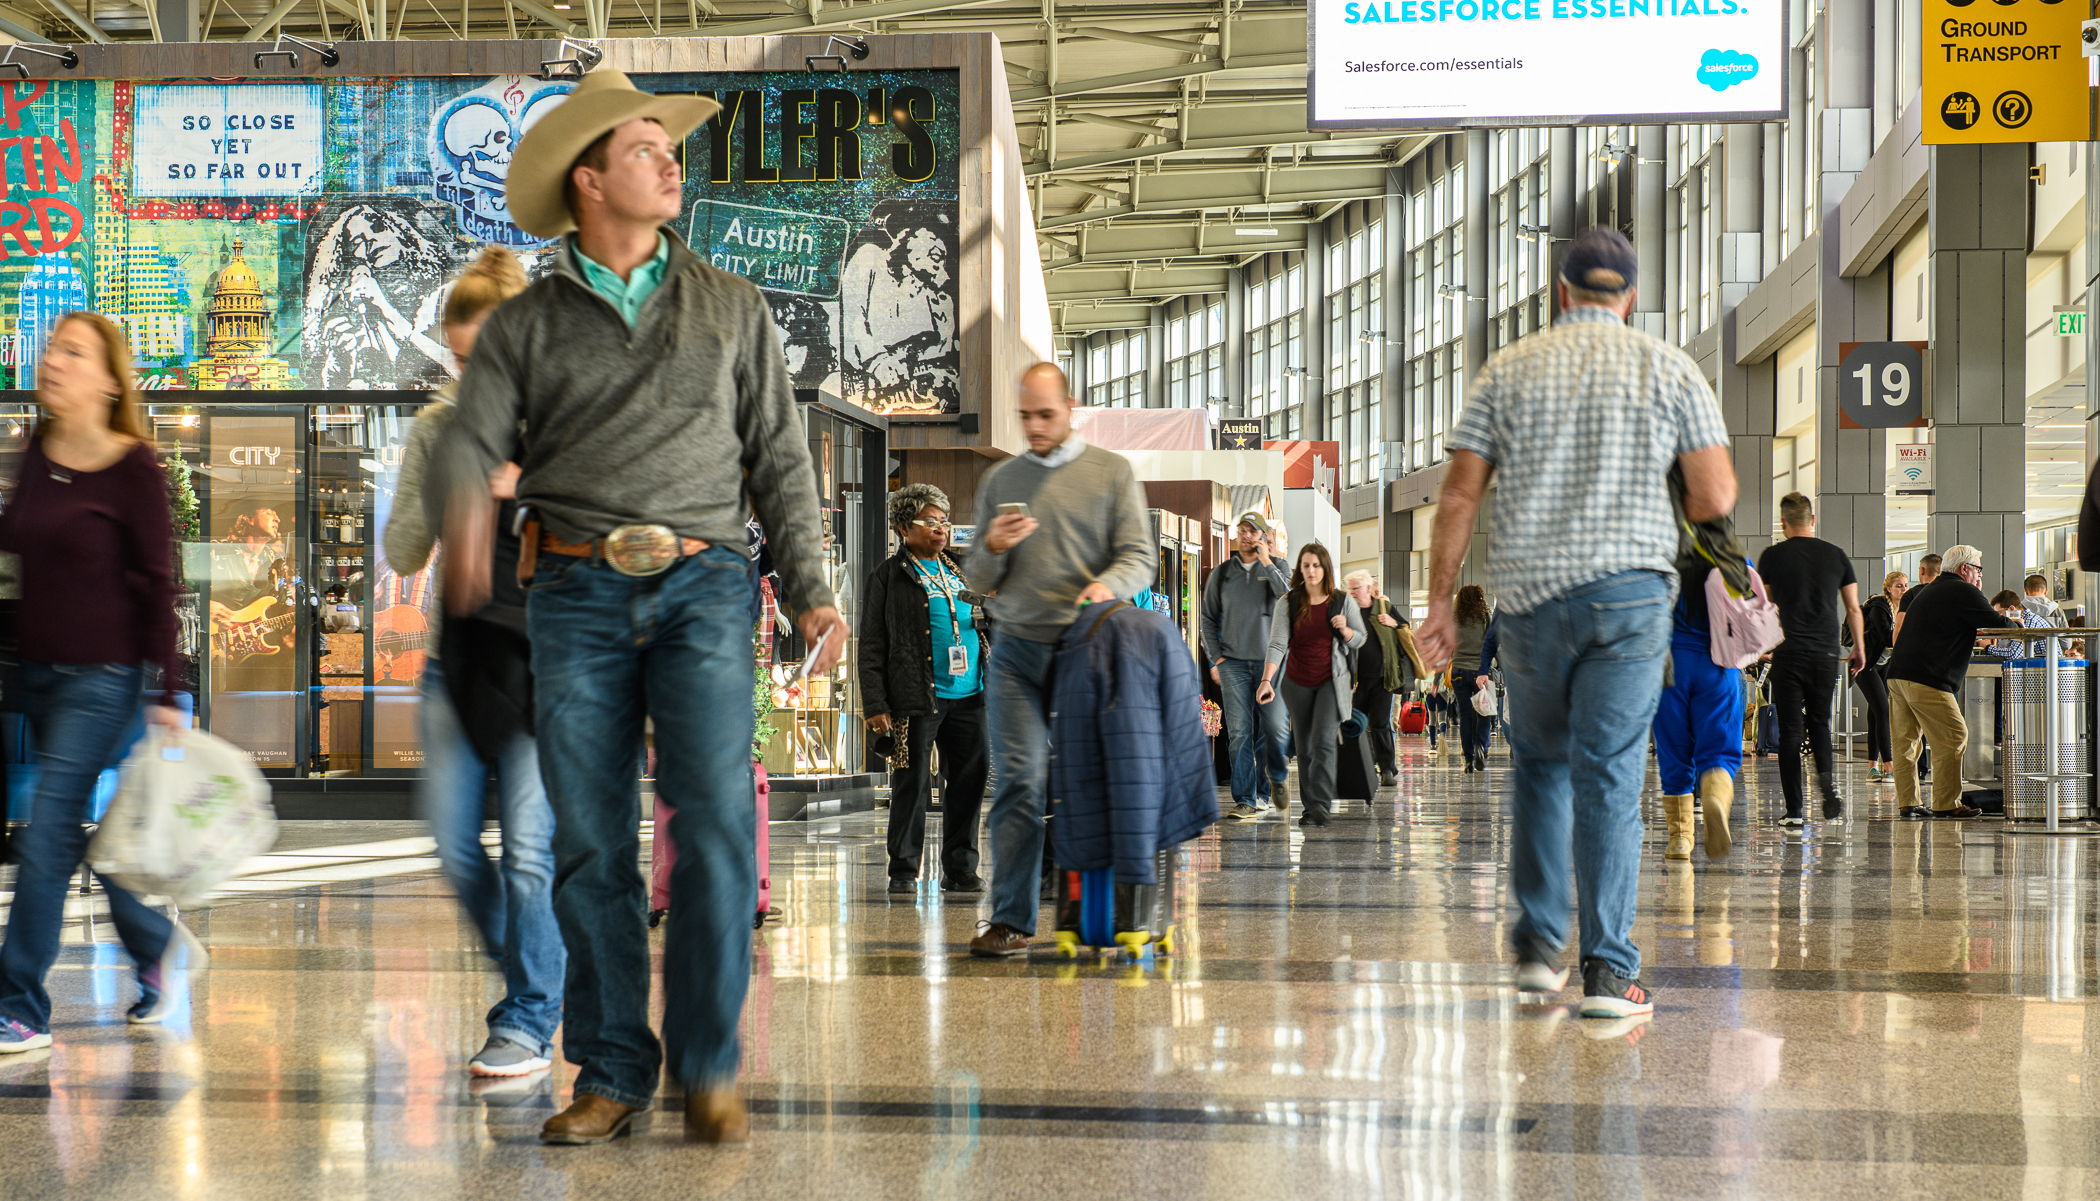 Man dressed in western wear and cowboy hat walking in a busy airport termina.